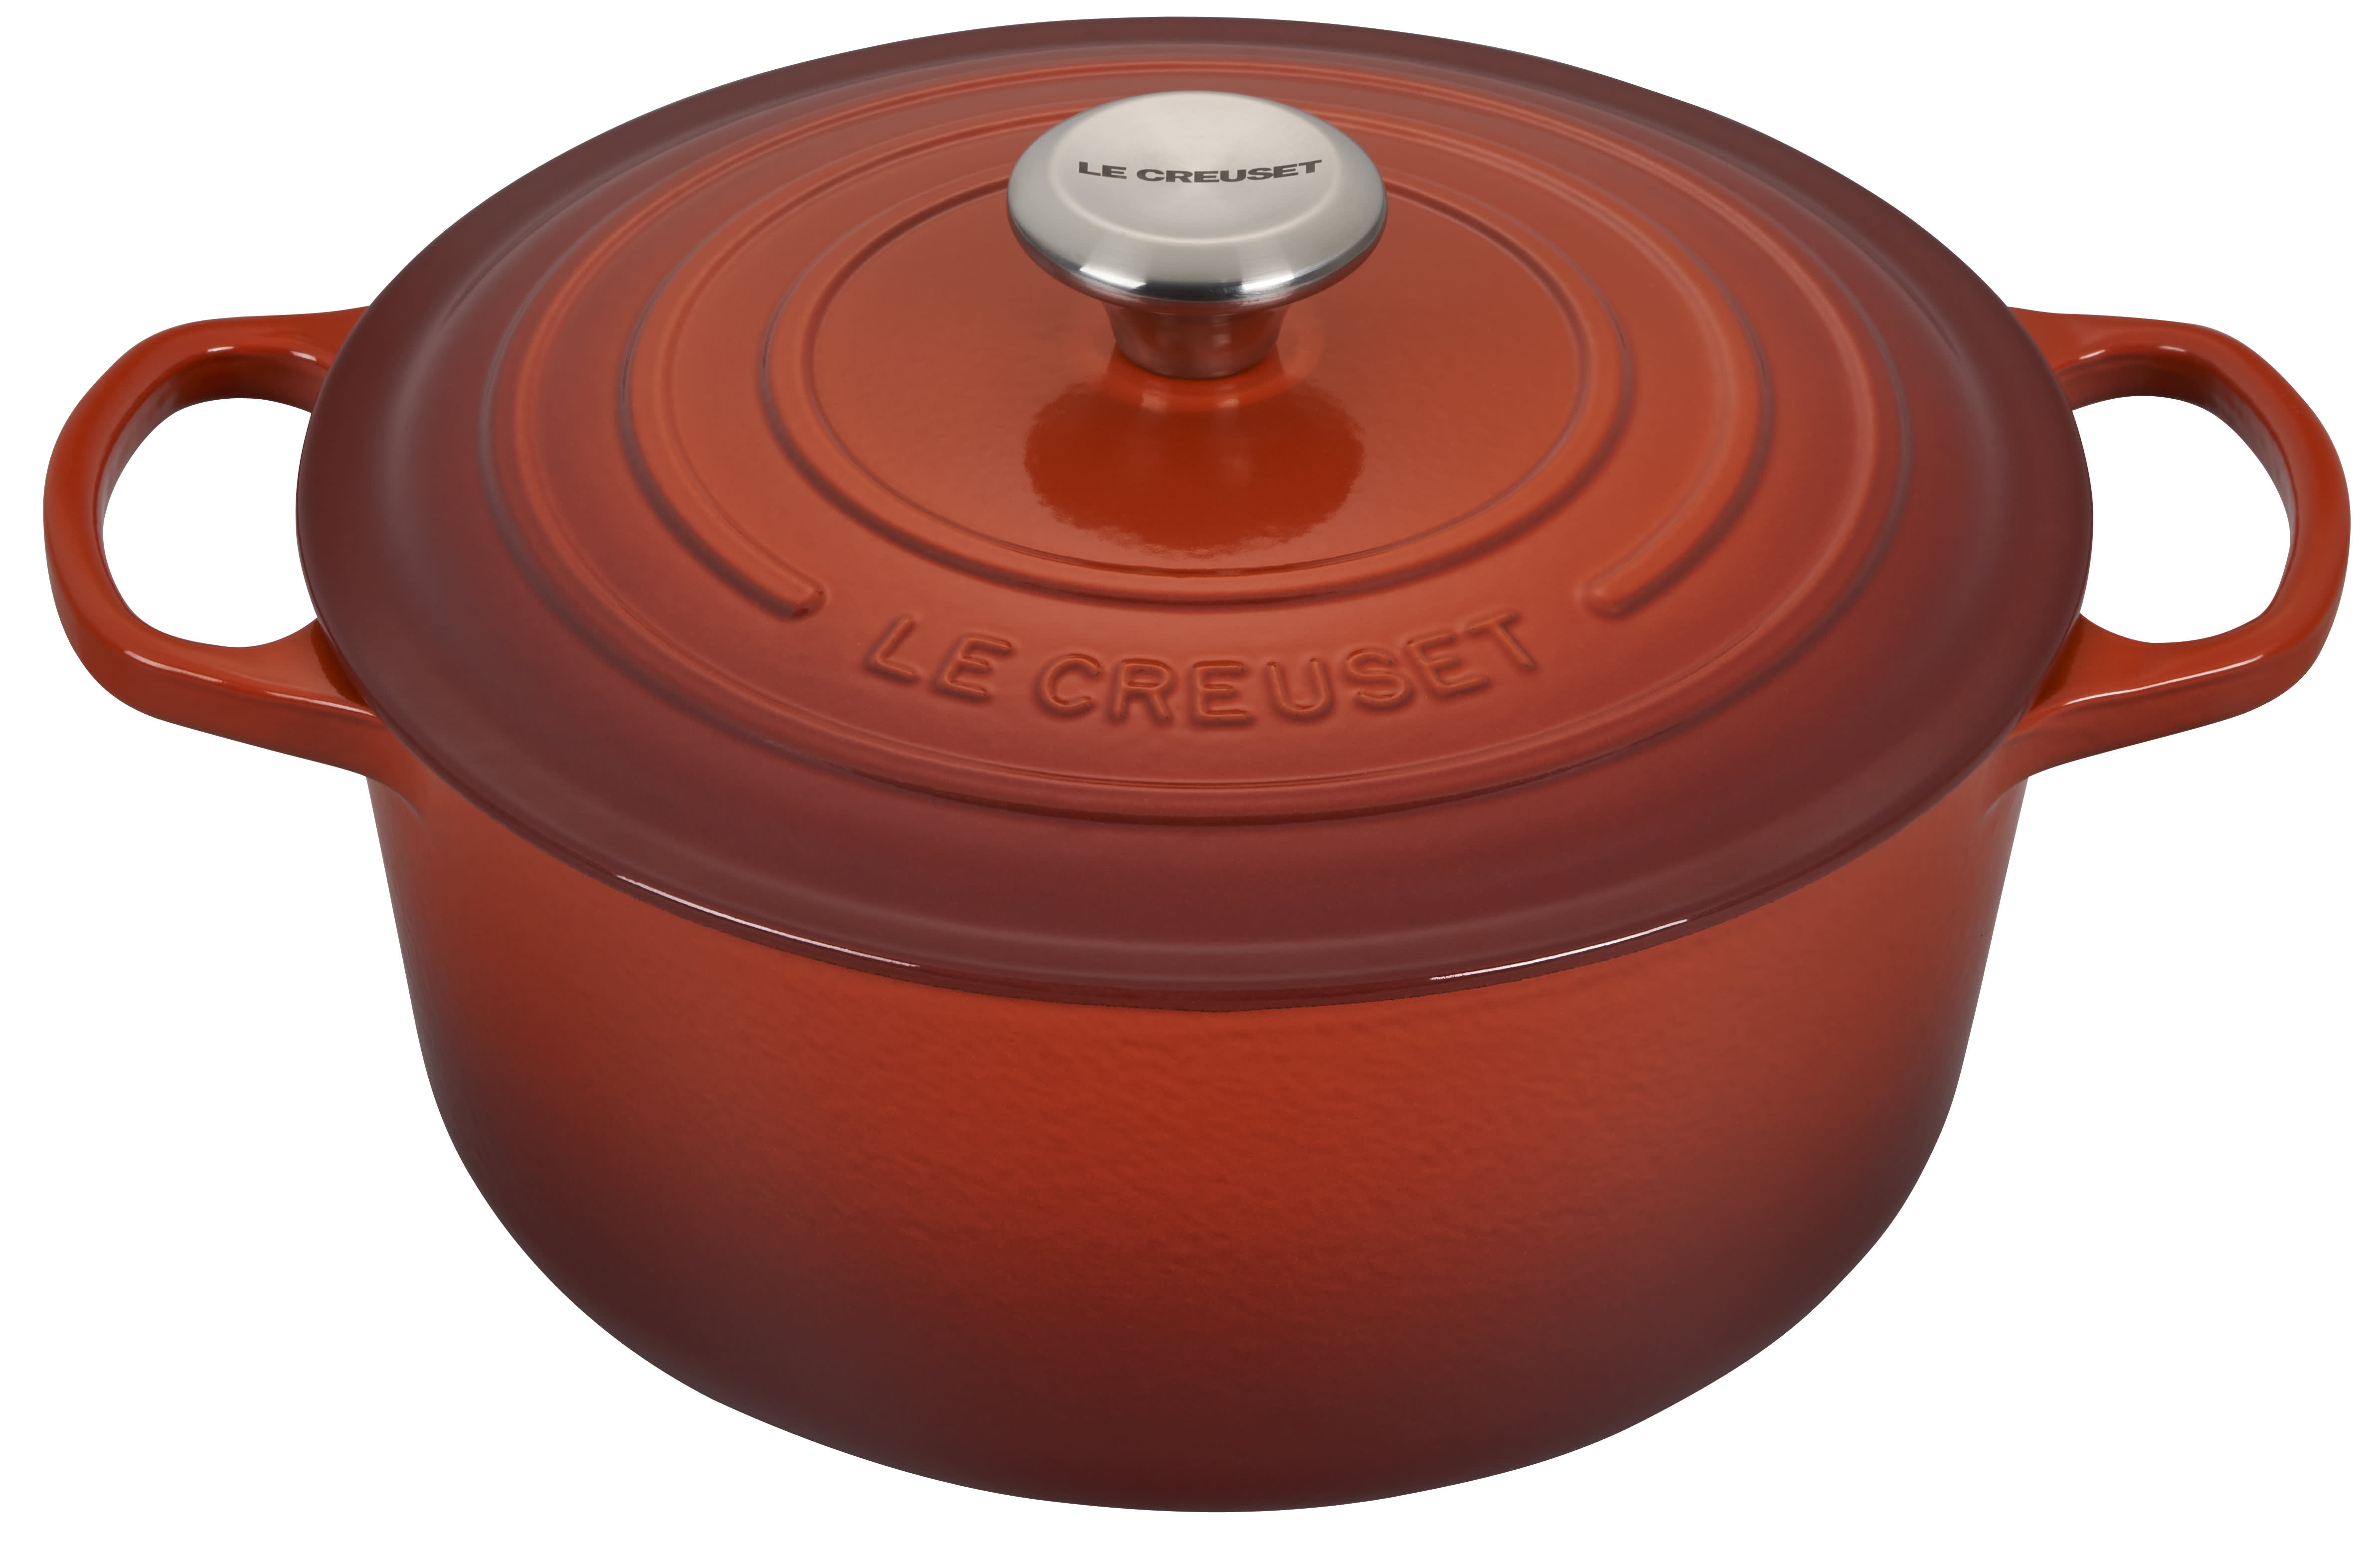 Le Creuset Just Launched a New Hue: Rhone